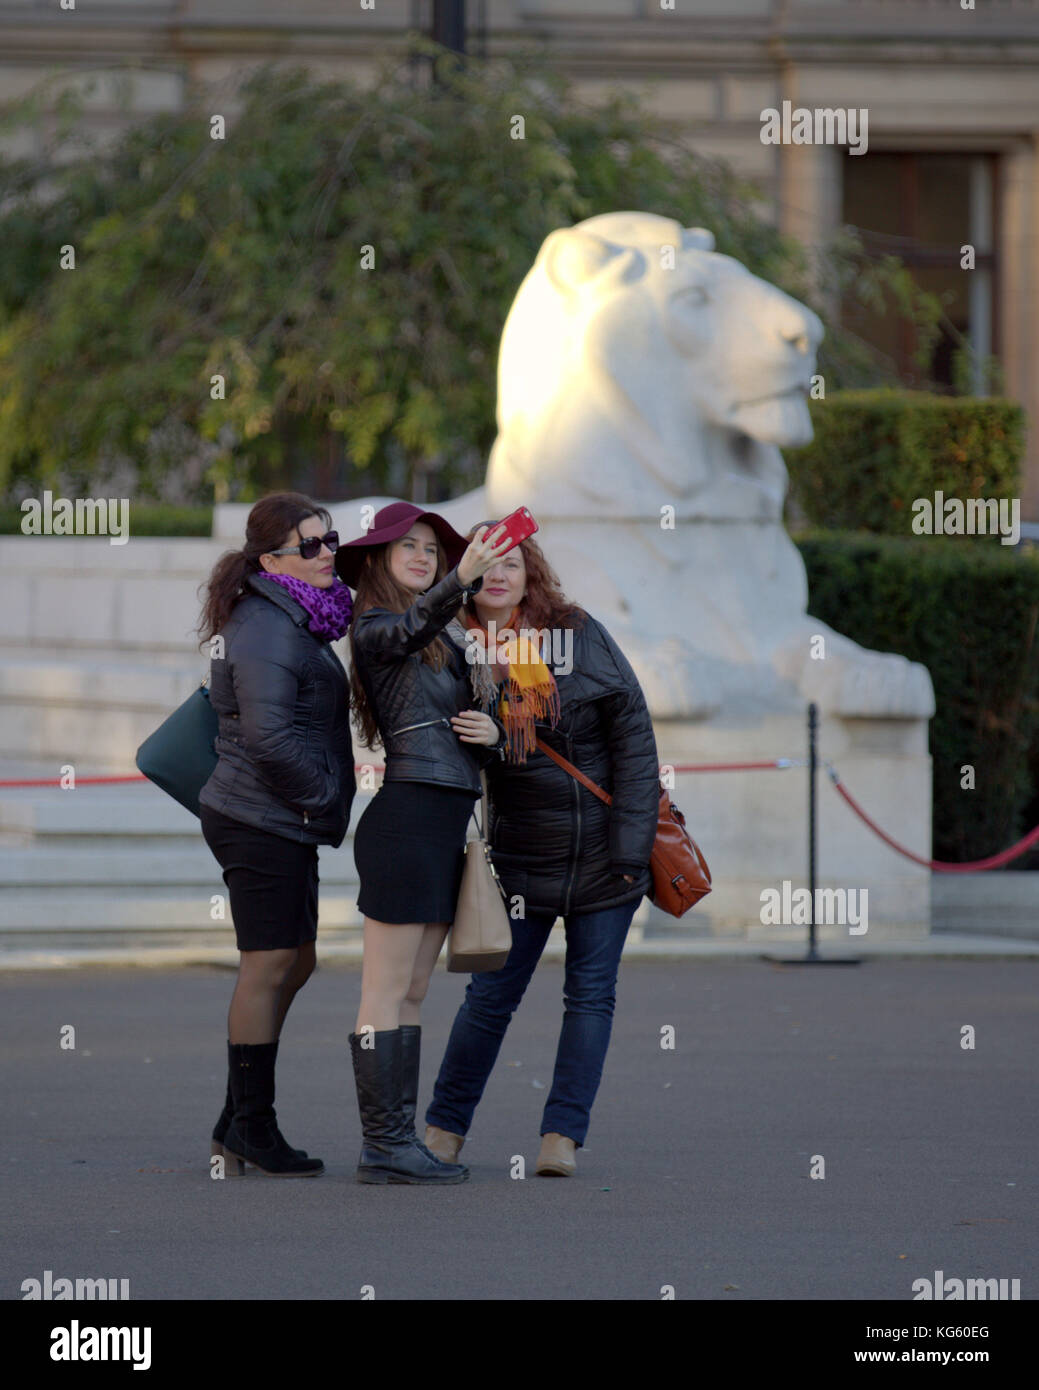 three women girls taking selfie photograph the  lion on the cenotaph on george square glasgow Stock Photo